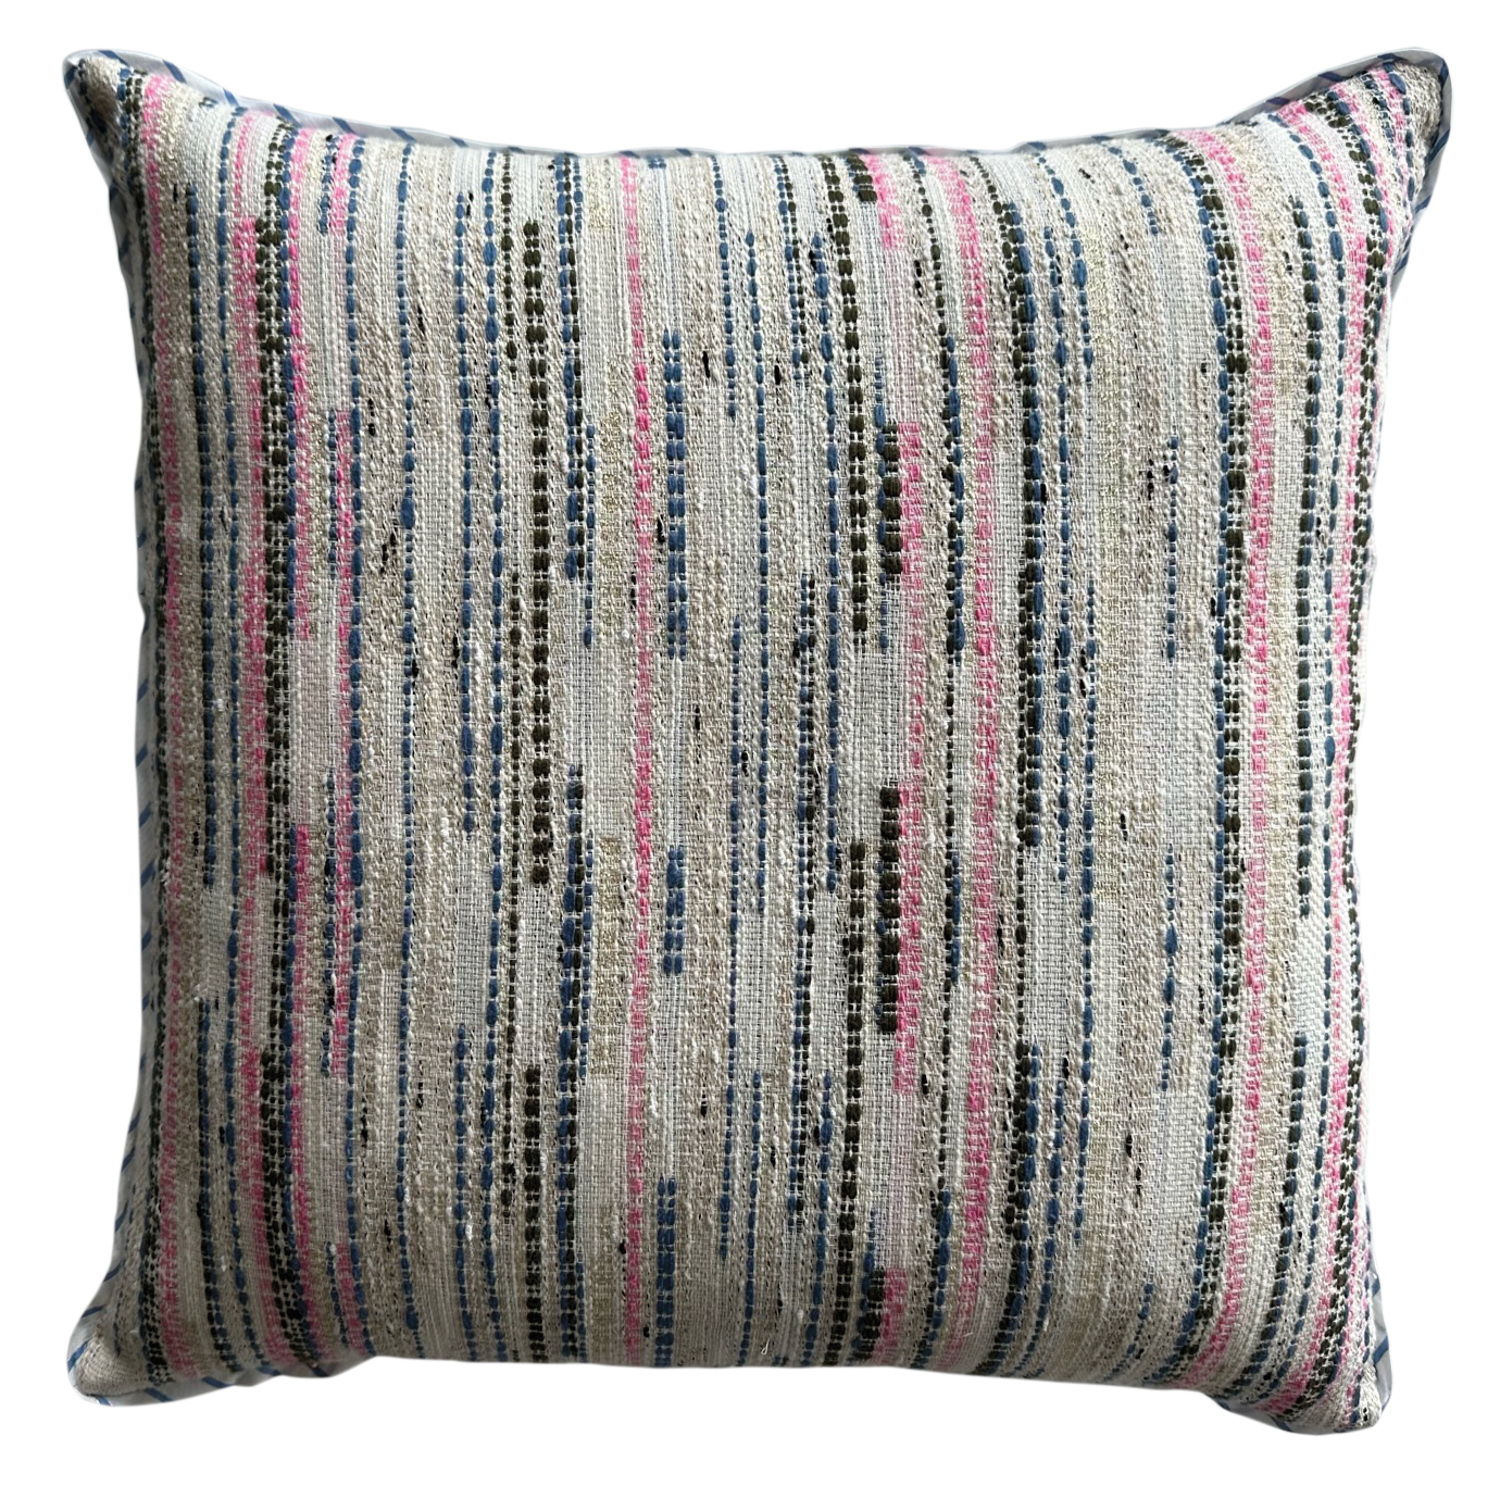 Textured throw pillow with vertical pink, black and navy stripes by Modern Perennial